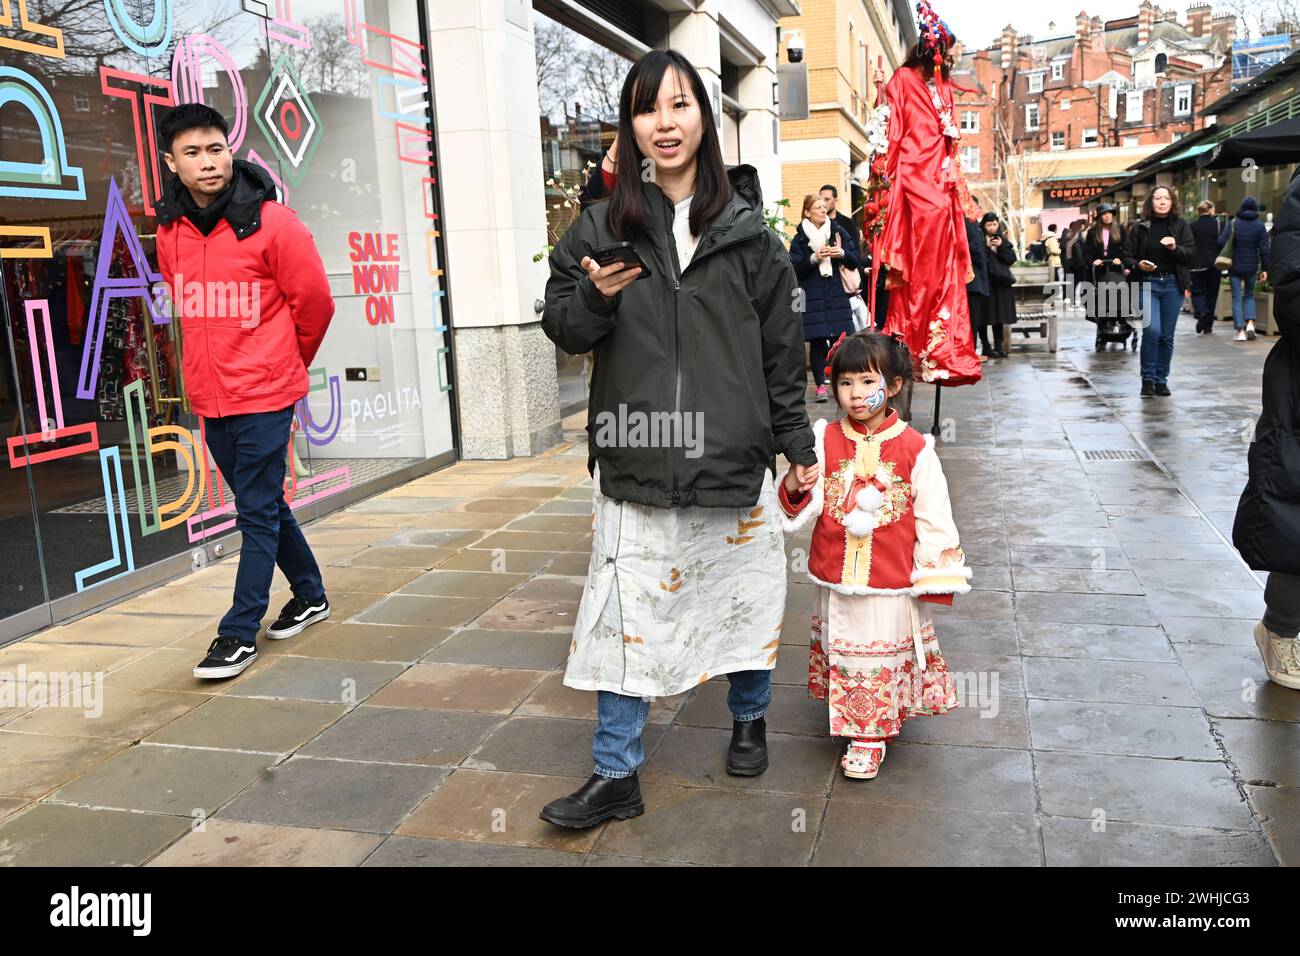 Duke of York Square, London, UK, 10 February 2024: As the Year of the Dragon approaches, we celebrate the Chinese New Year which symbolizes good luck, health and strength. The Duke of York Square Market offers traditional Chinese food and exciting entertainment including traditional dragon and lion dance performances, Chinese drummers, and celebratory face painting for your little ones.The Year of the Dragon begins with the Lunar New Year 2024. Deeply rooted in the rich heritage of Chinese culture, the Year of the Dragon is a powerful symbol of wealth and good fortune from East and Southeast Stock Photo